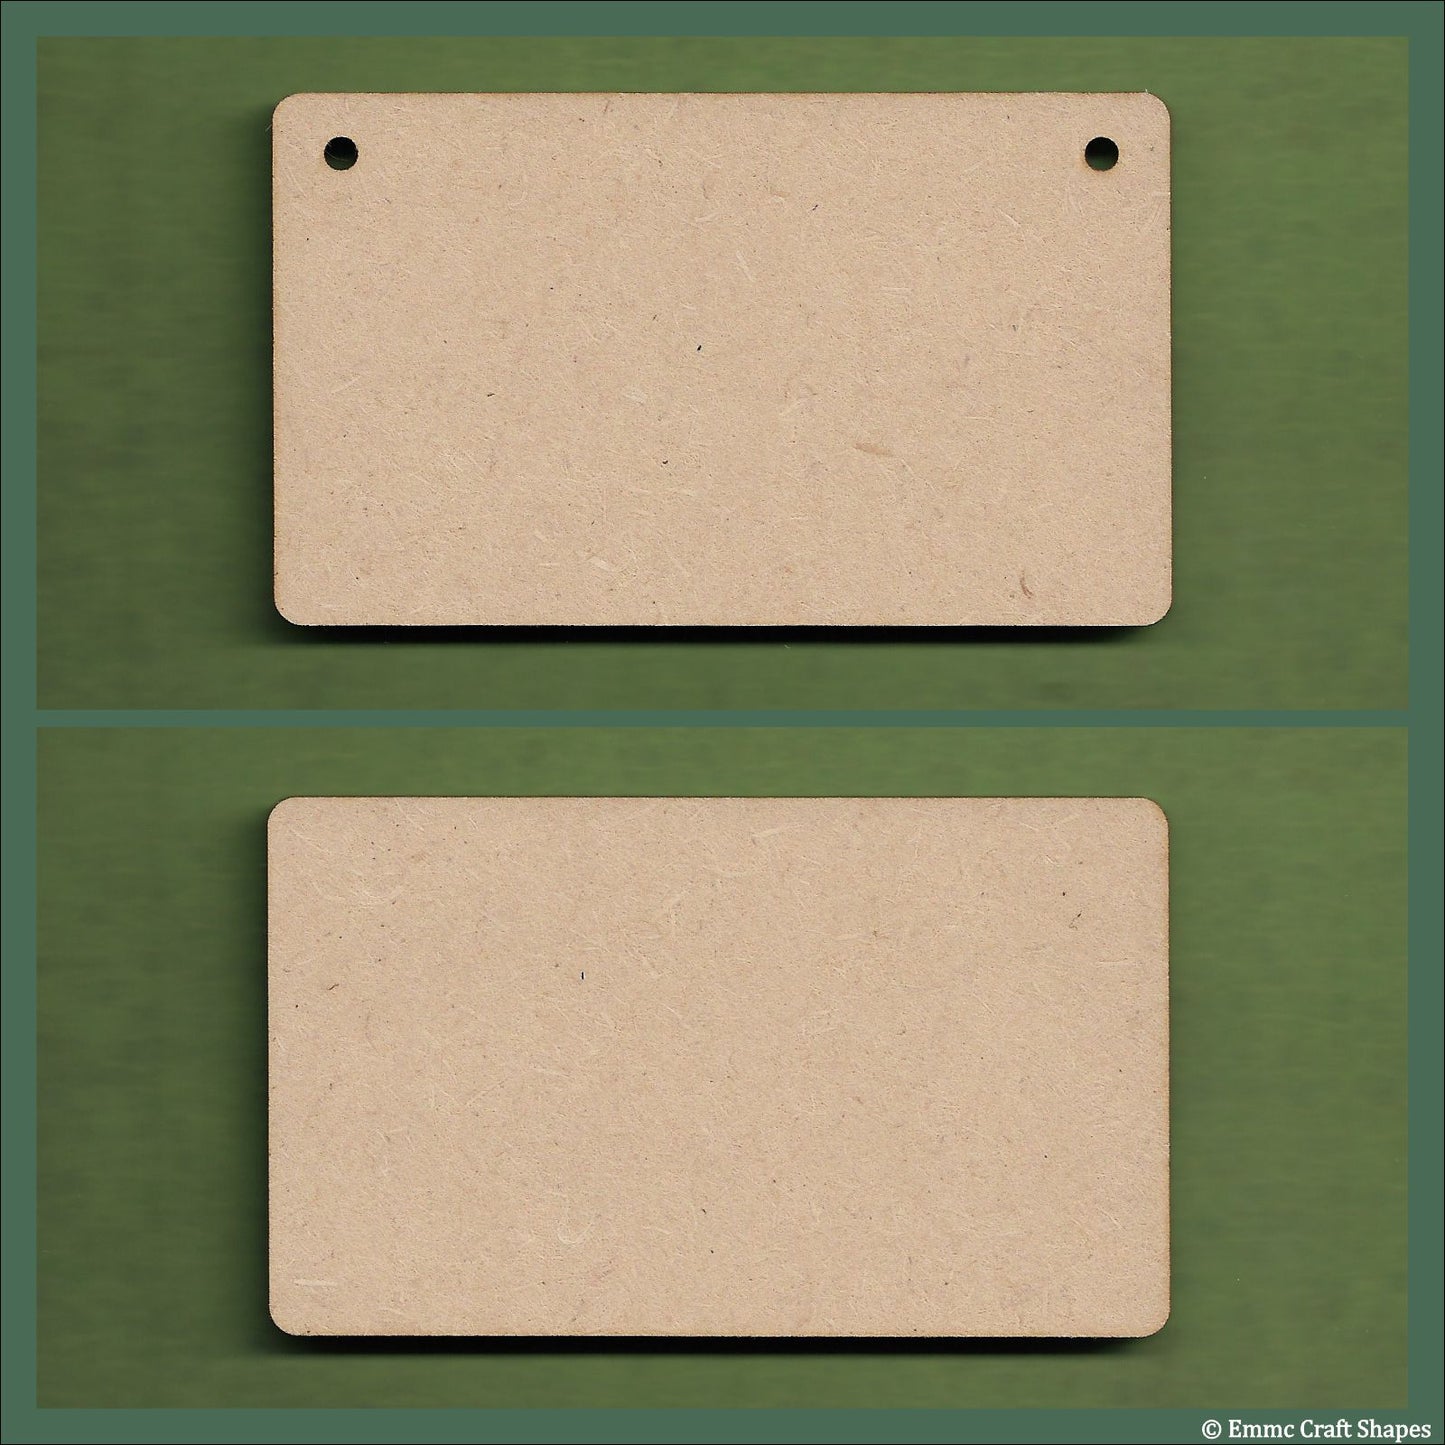 5 cm Wide 3mm thick MDF Plaques with rounded corners